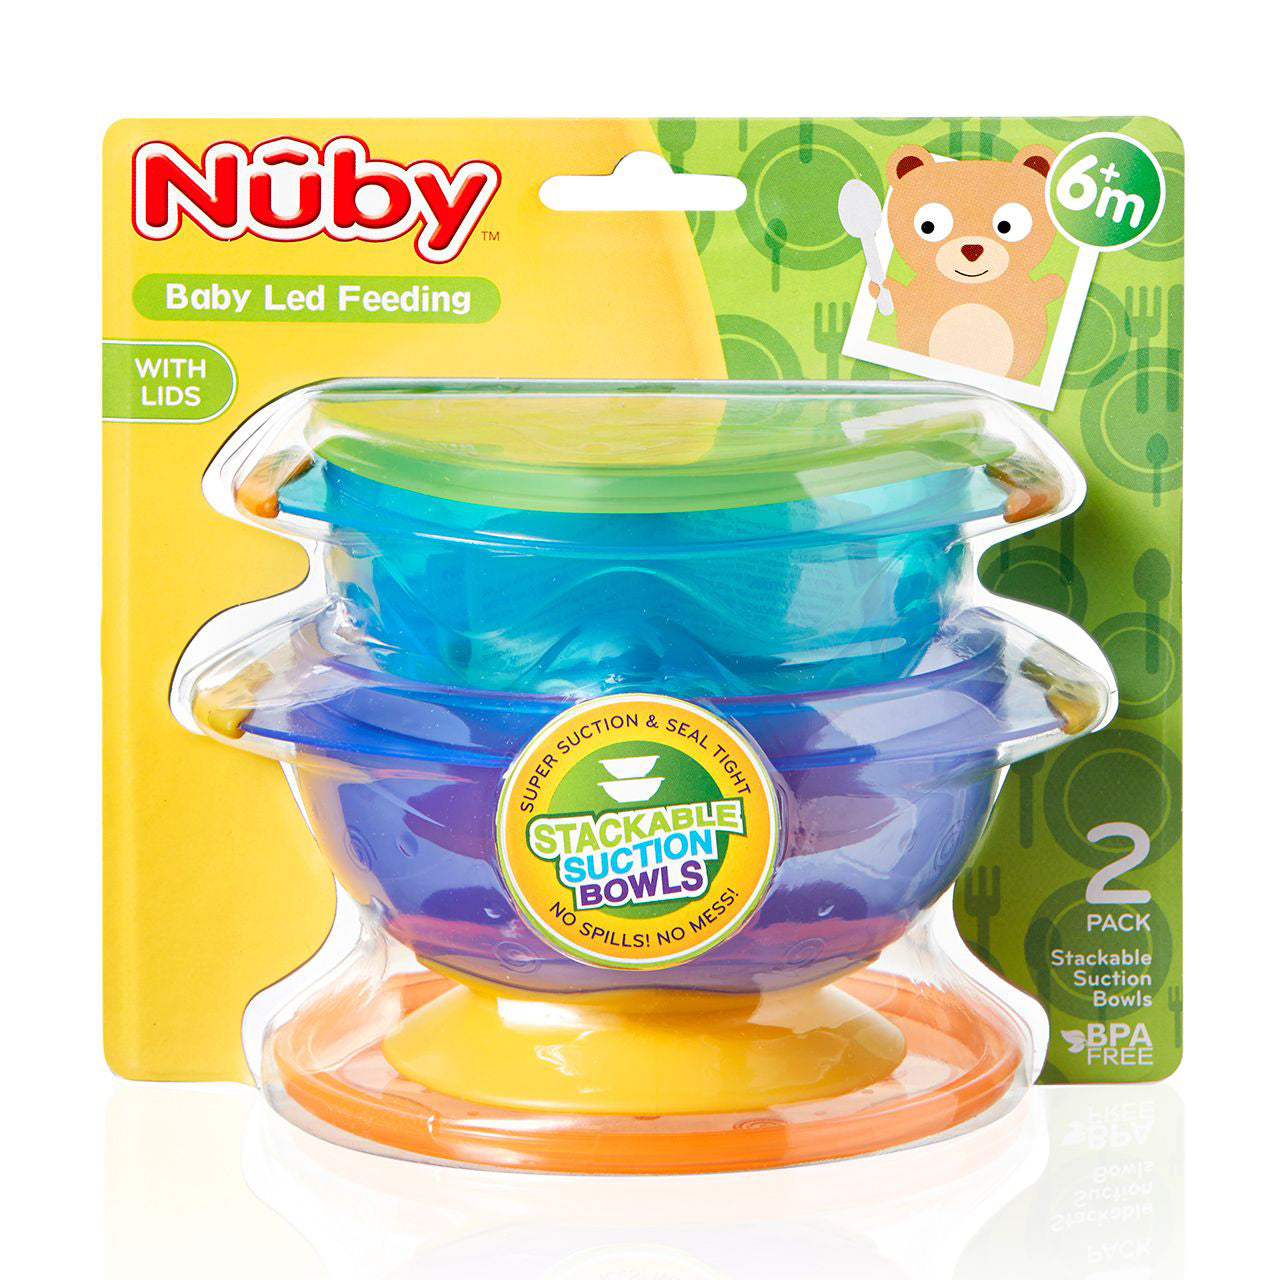 Nuby Stackable Suction Bowls 2Pk l Available at Baby City